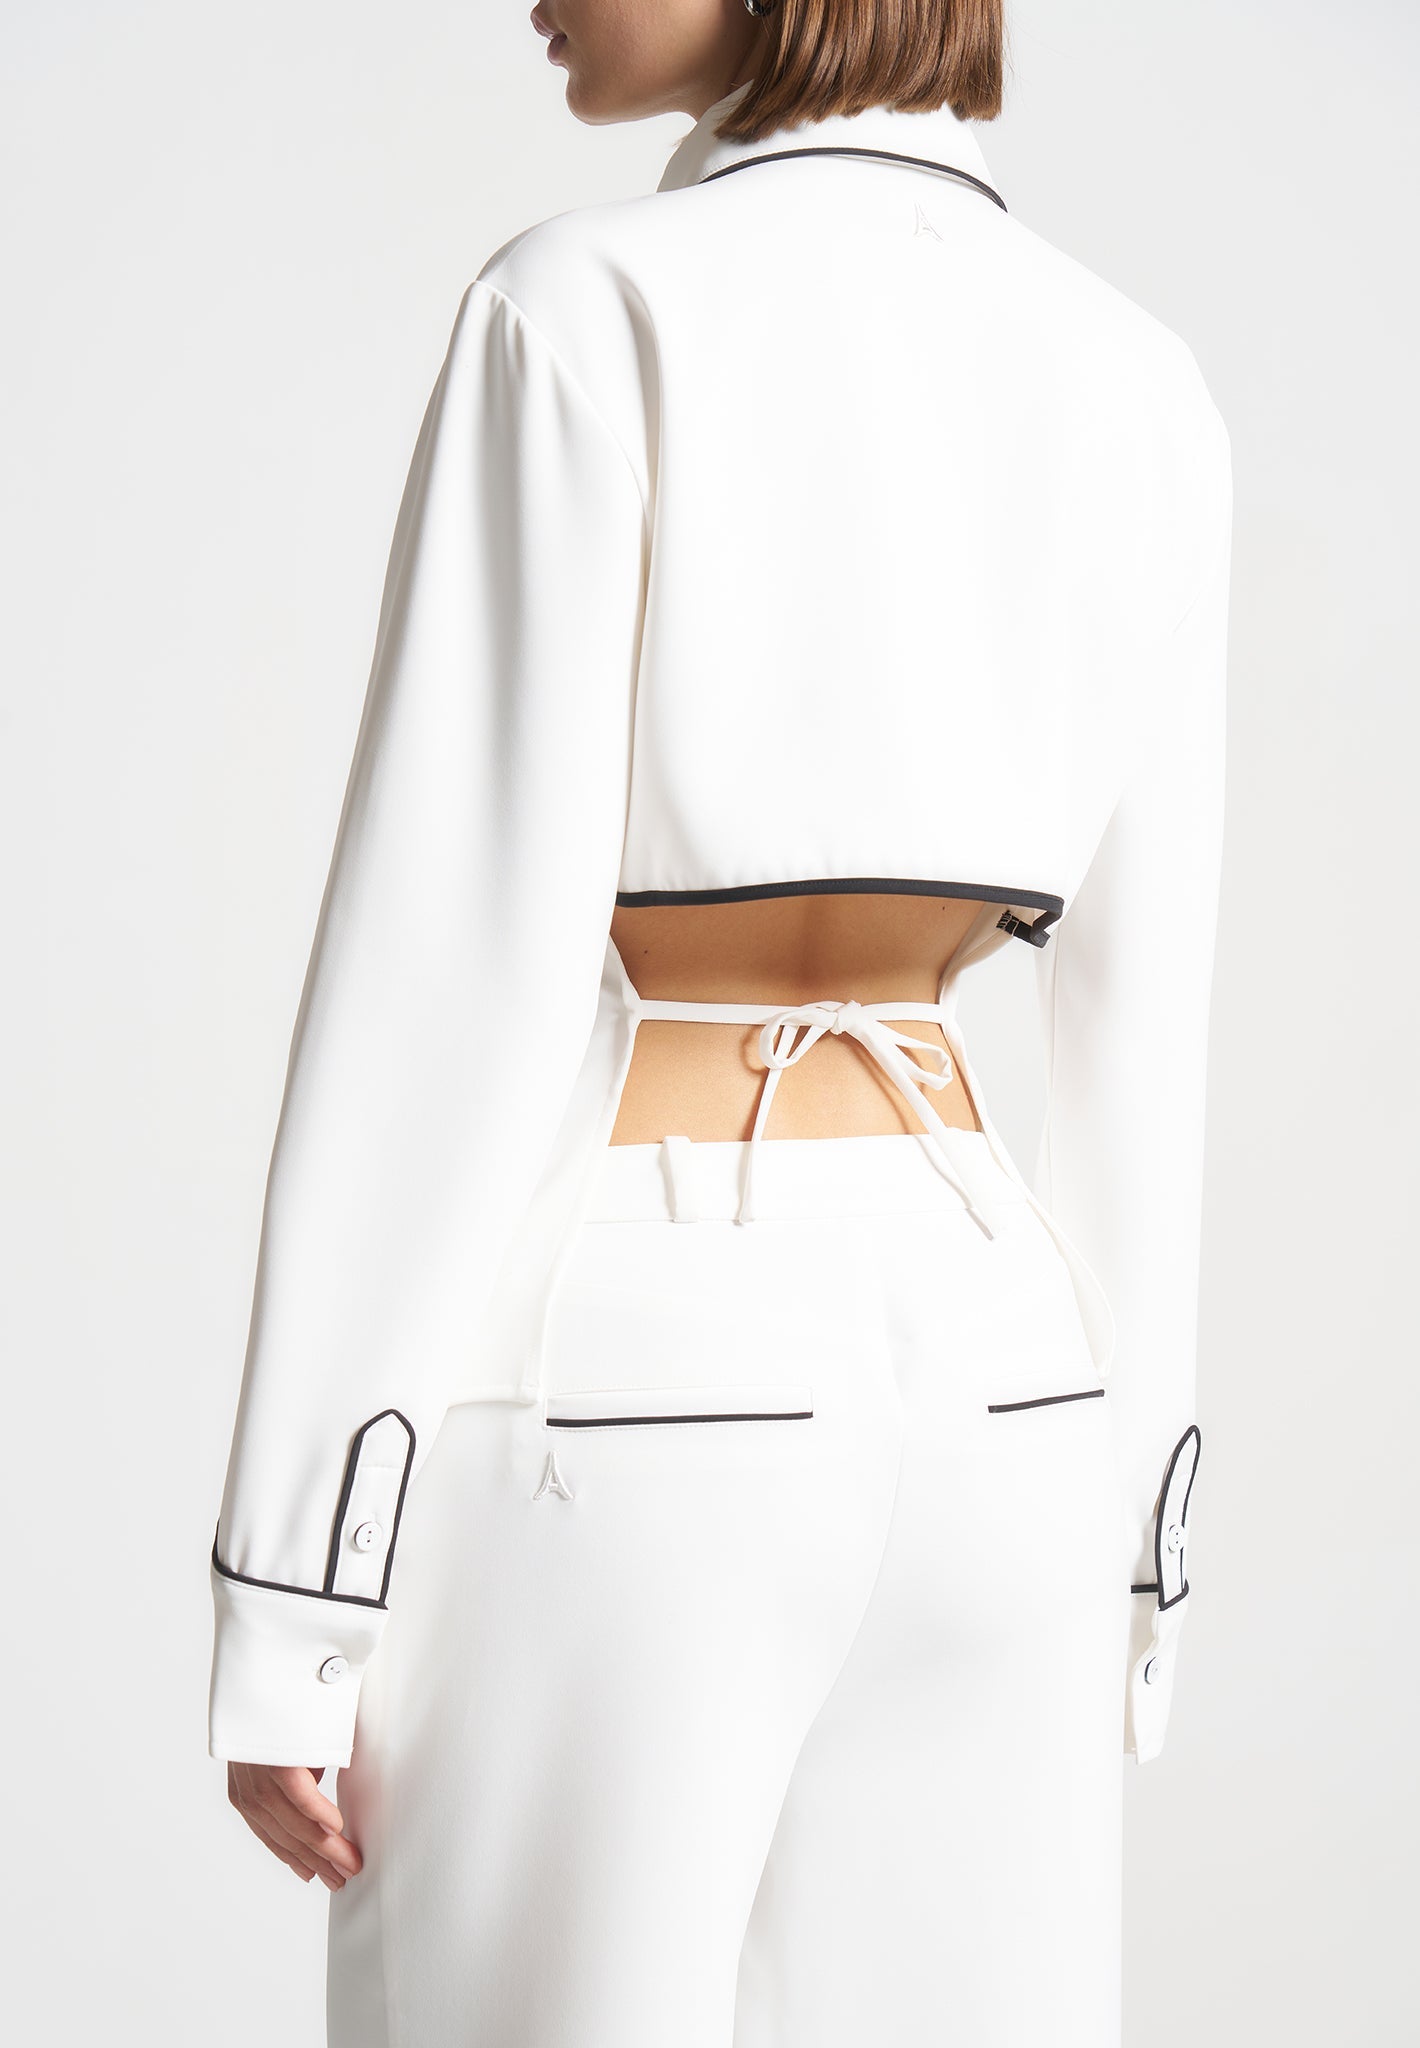 contrast-piped-backless-tie-shirt-white-black